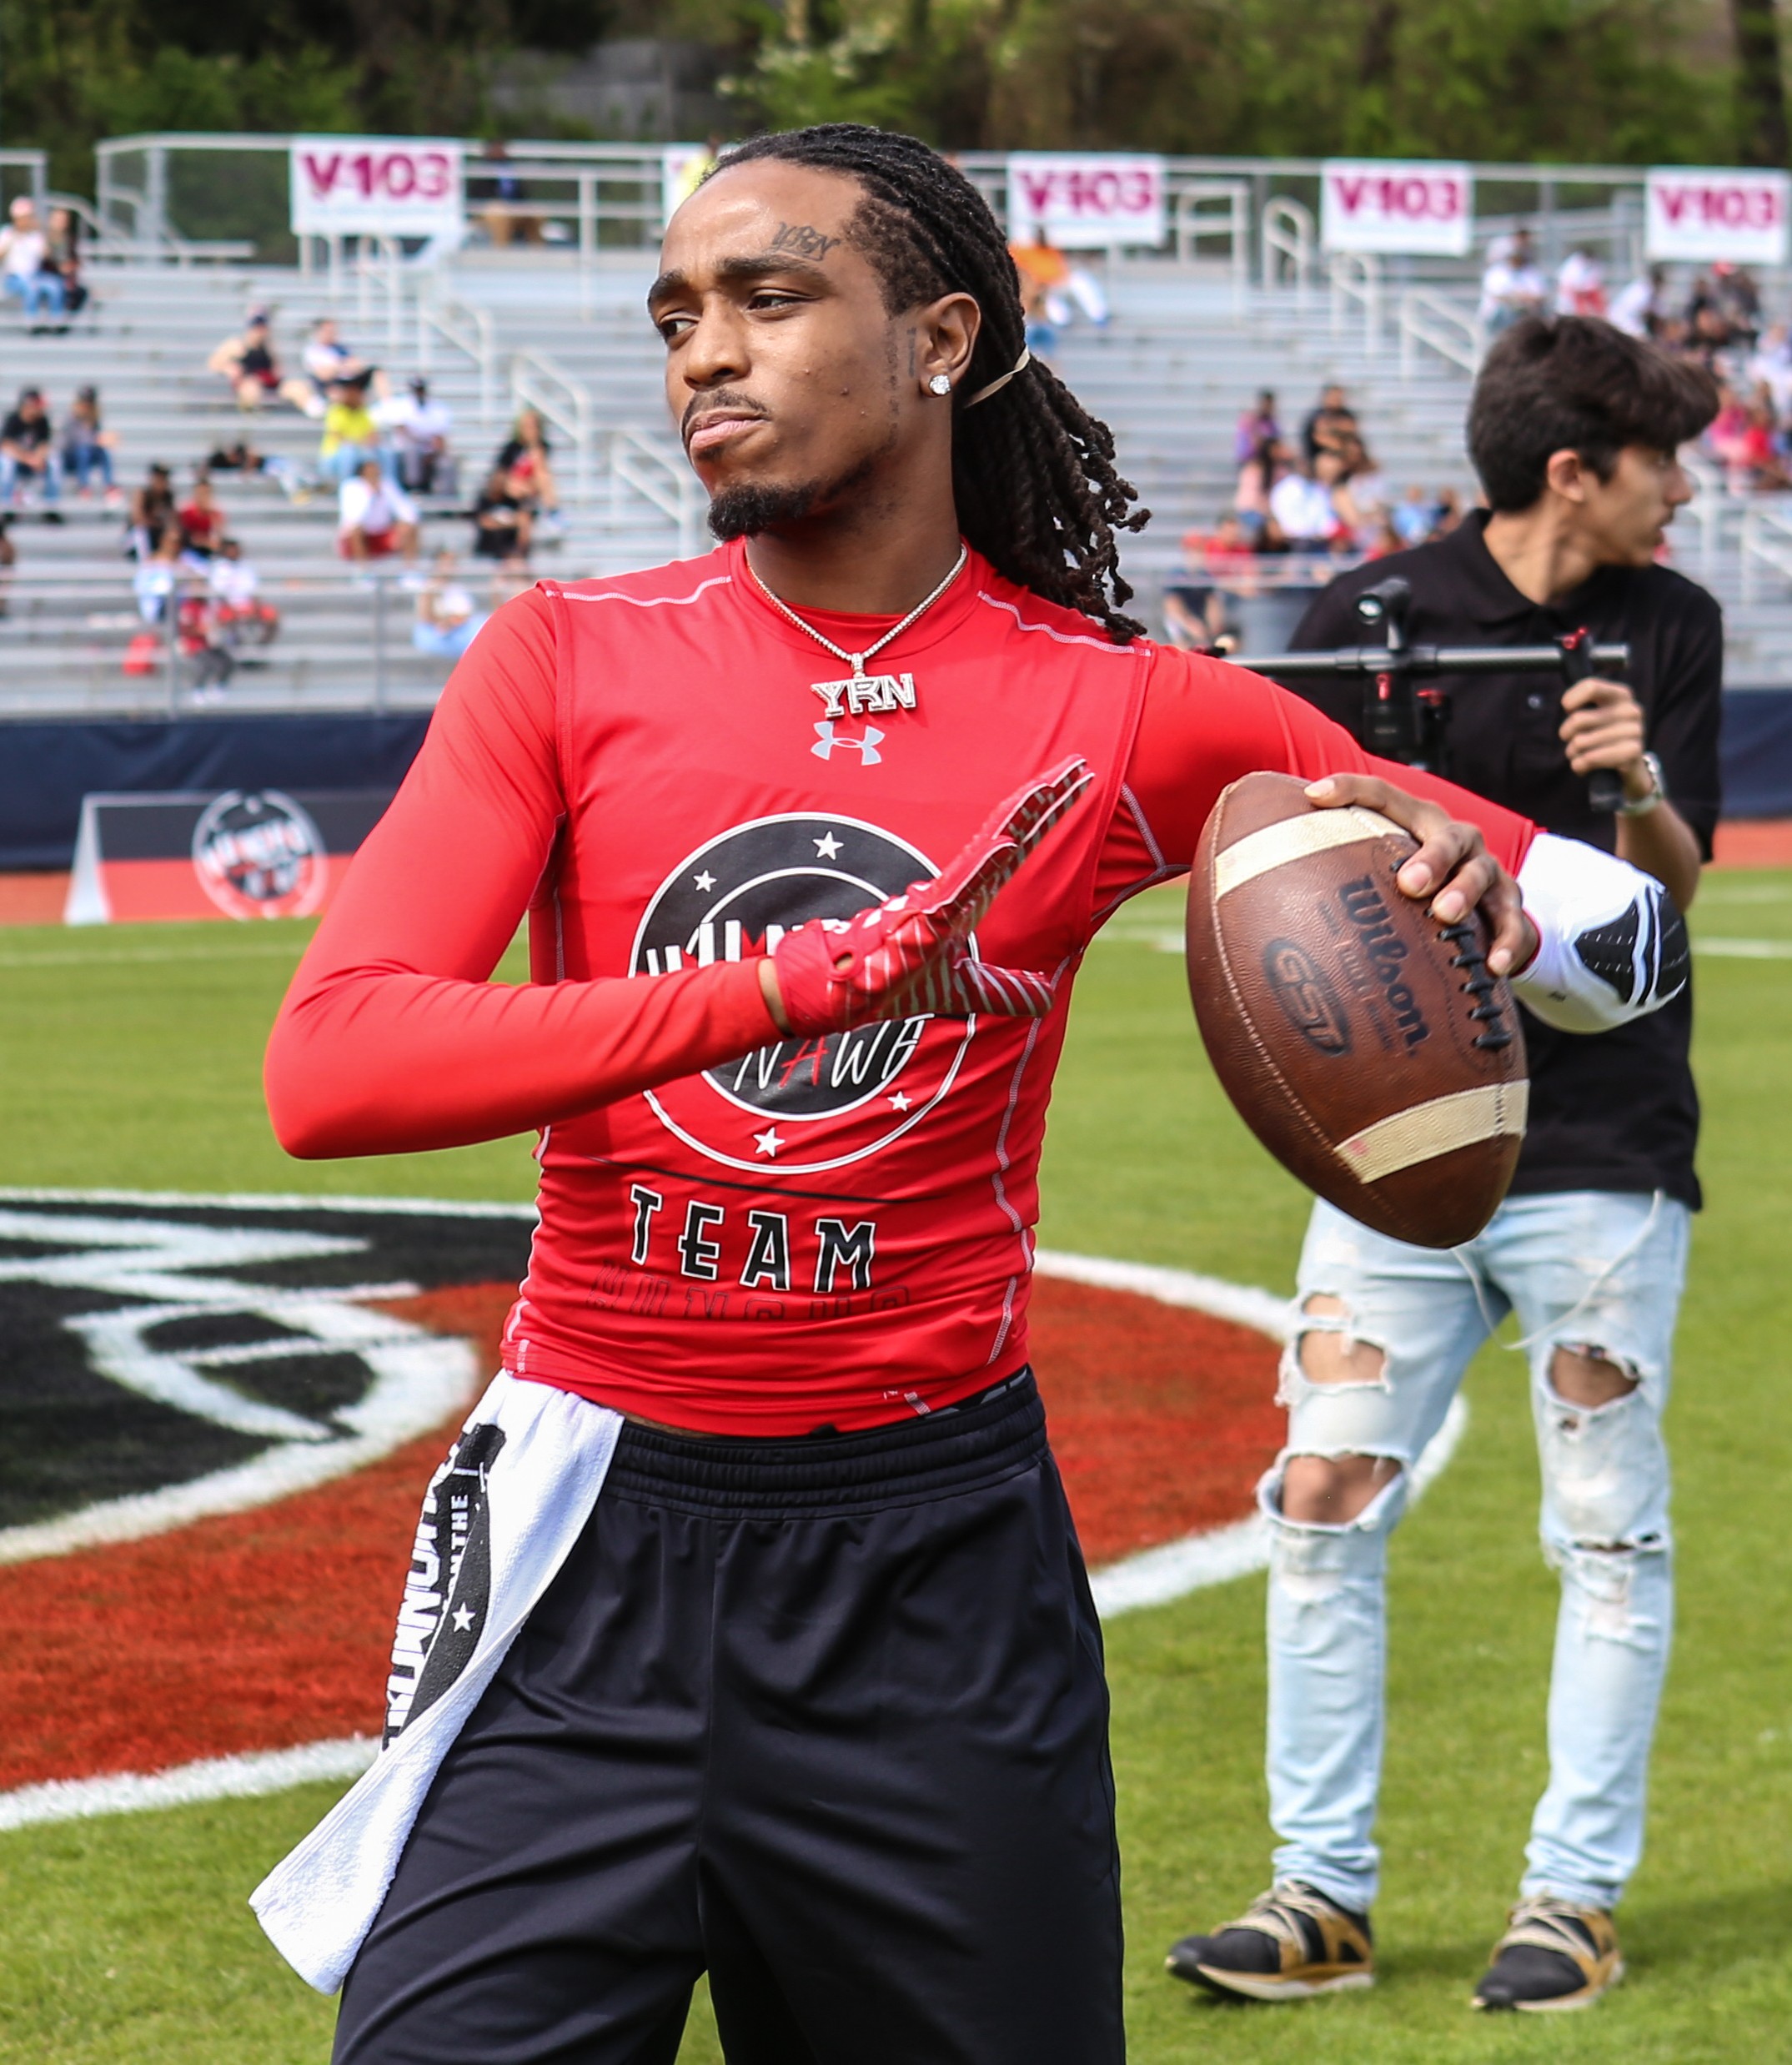 Quavo Migos Brings Out 21 Savage, Lil Baby, Rich The Kid & More To Play  Football! 